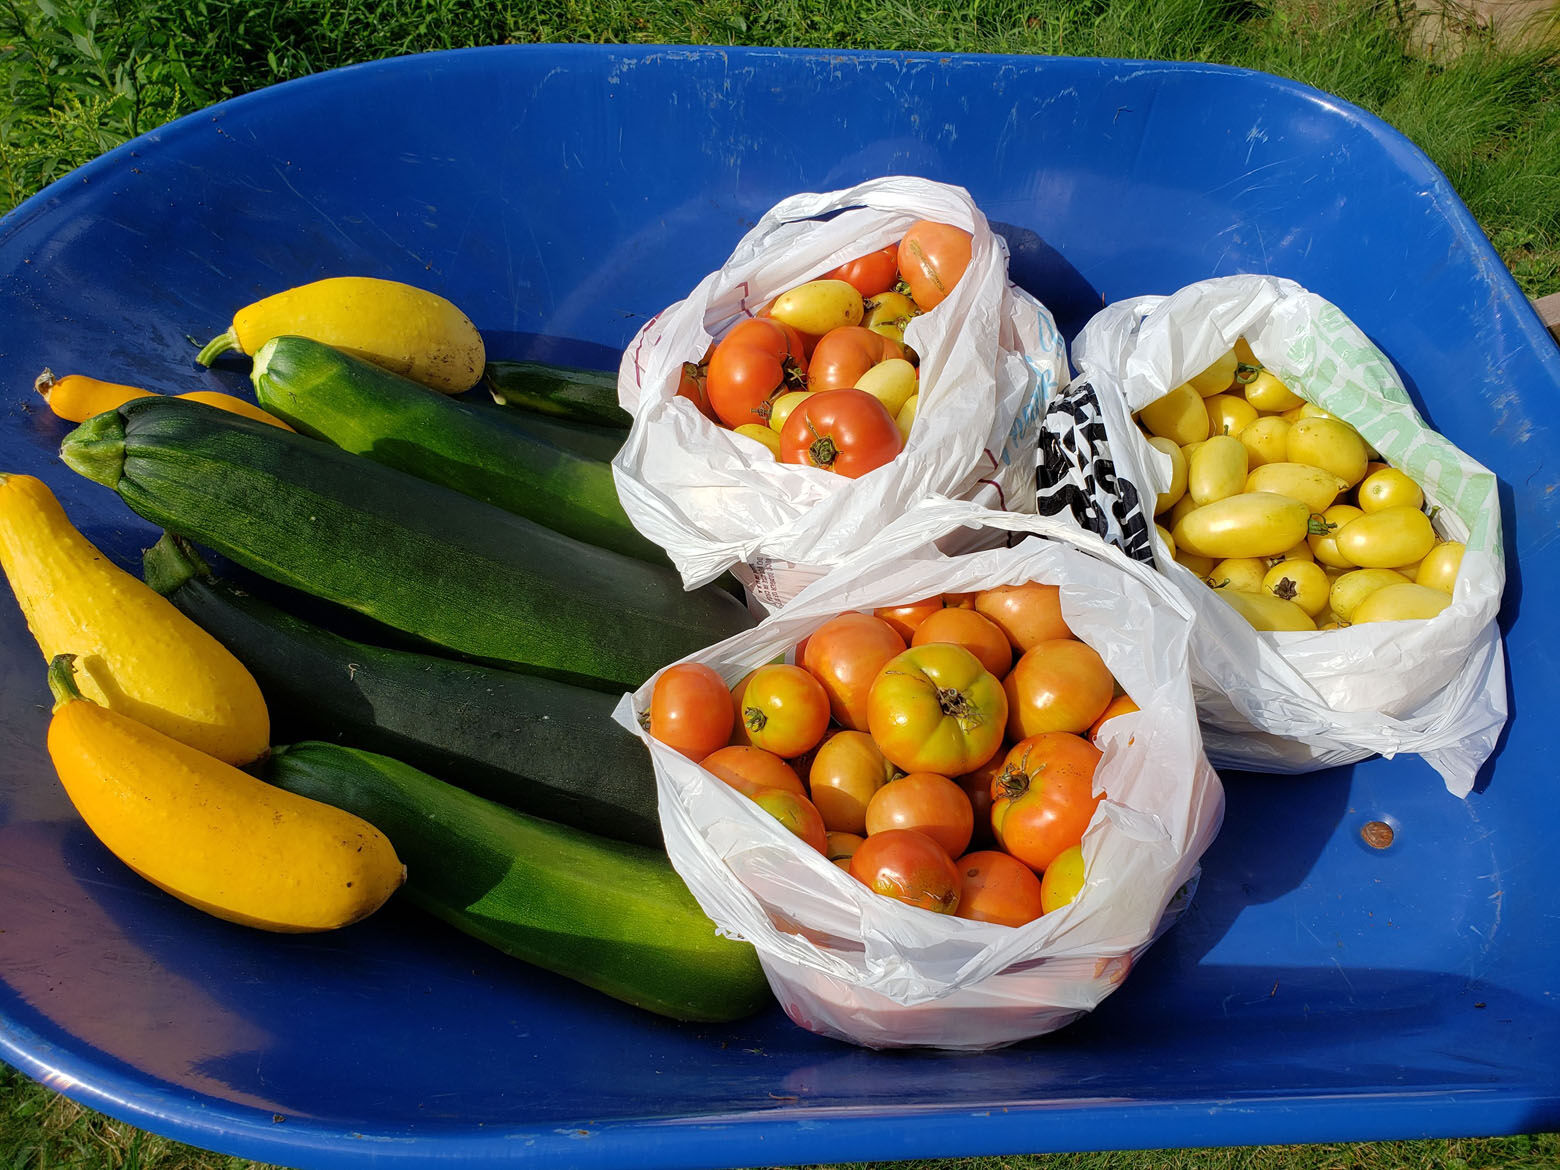 <p>The ampleharvest.org food insecurity program, Grow More Feed More, connects communities with food donations across the U.S.</p>
<p>&nbsp;</p>
